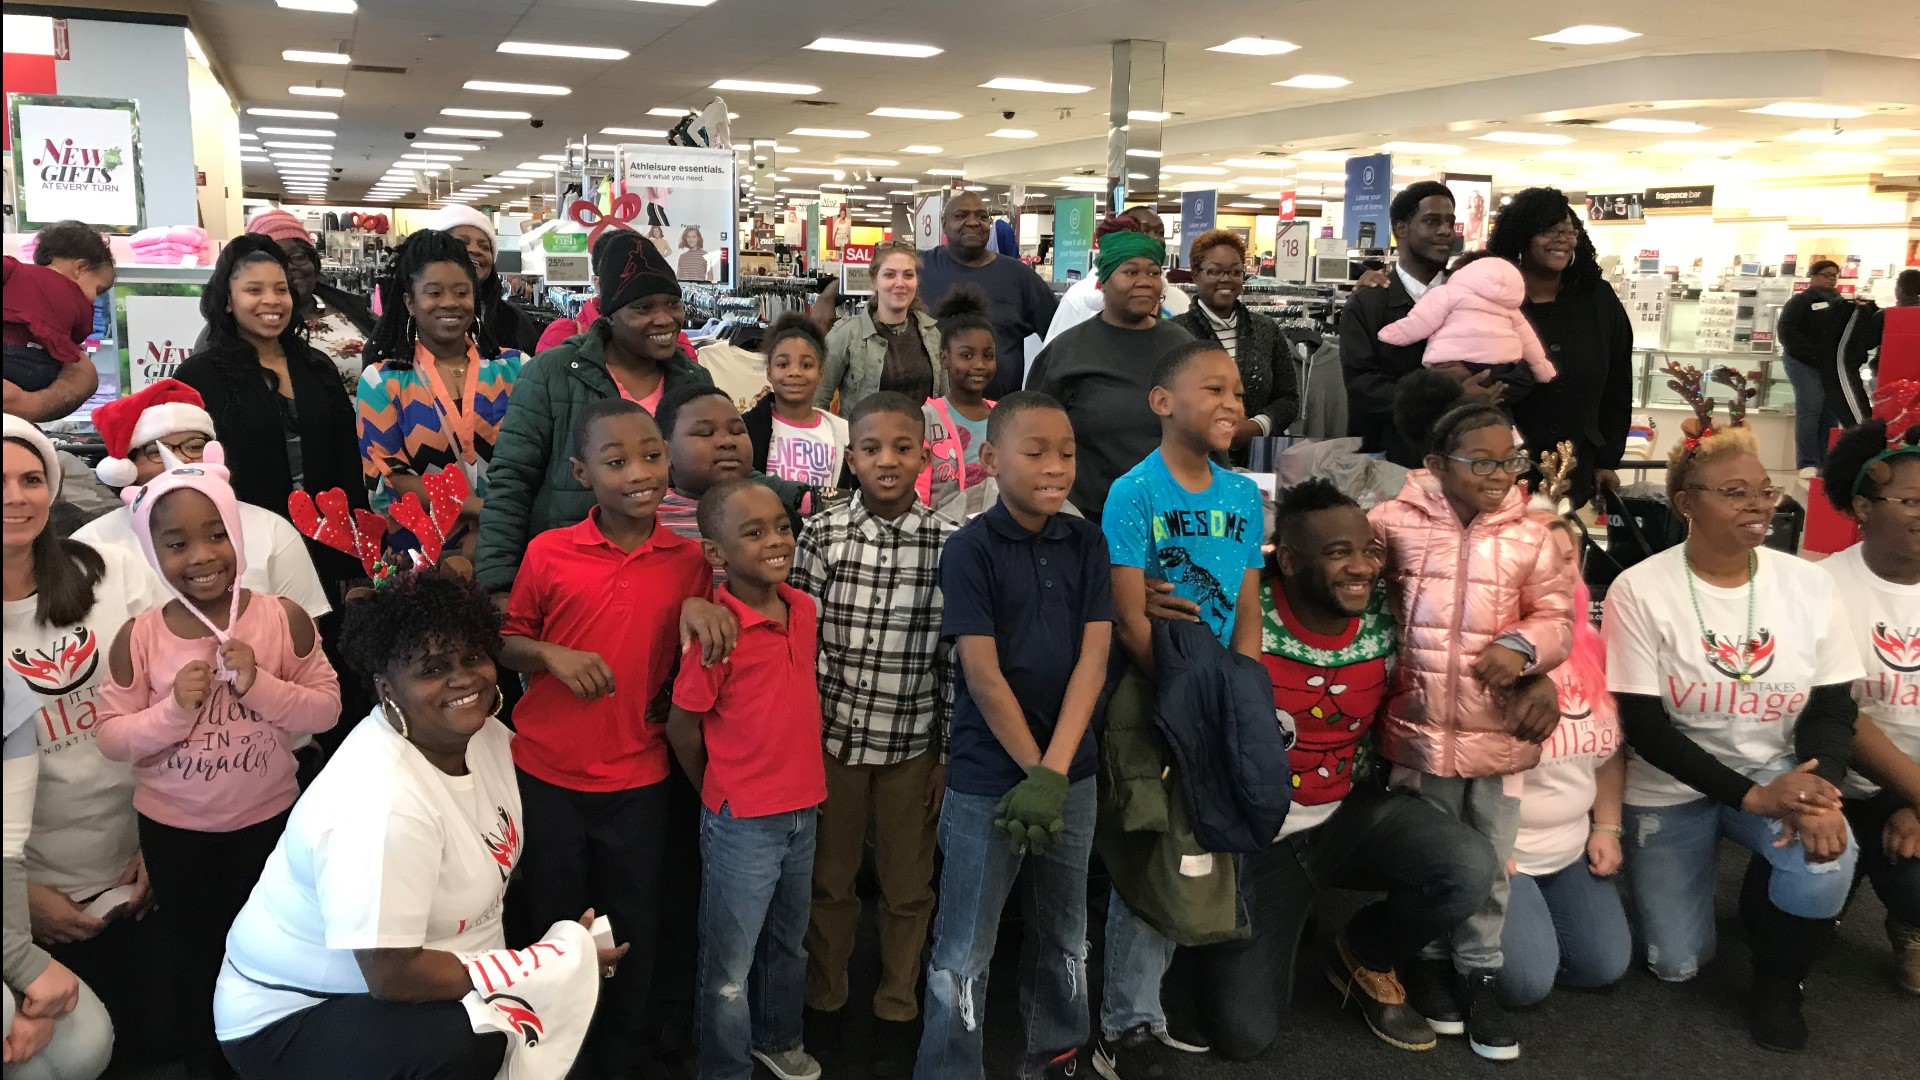 He gave 30 kids $250 gift cards to spend at Kohl's